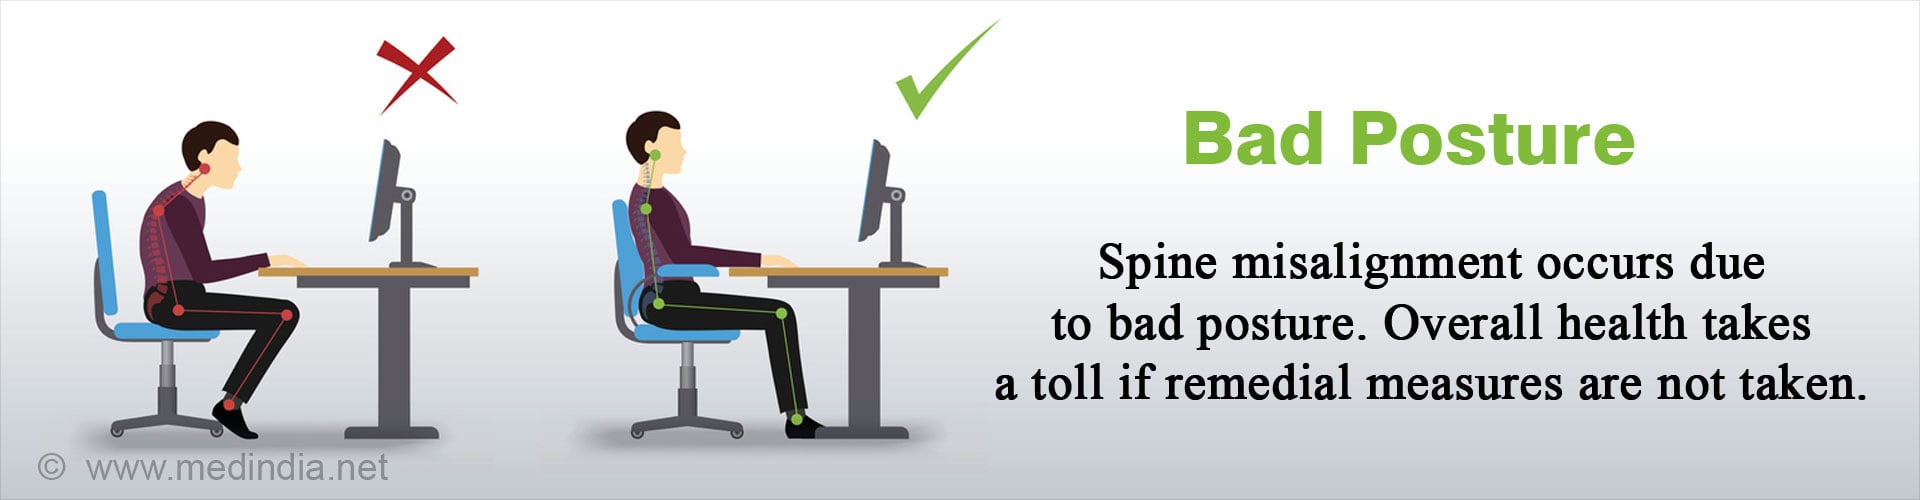 Bad Posture - Spine misalignment occurs due to bad posture. Overall health takes a toll if remedial measures are not taken.